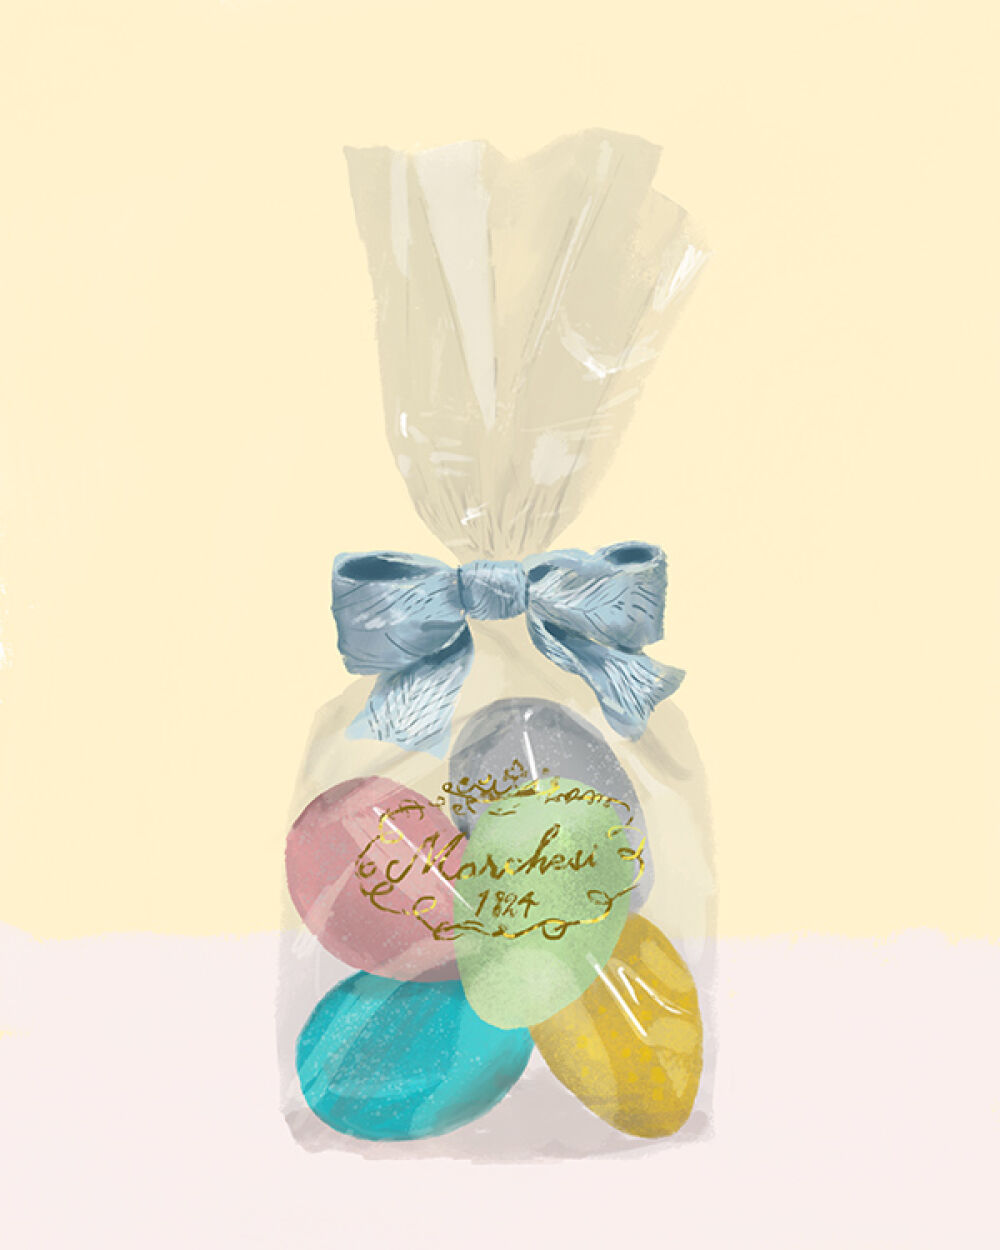 Easter chocolate eggs illustrated by Christina Gliha